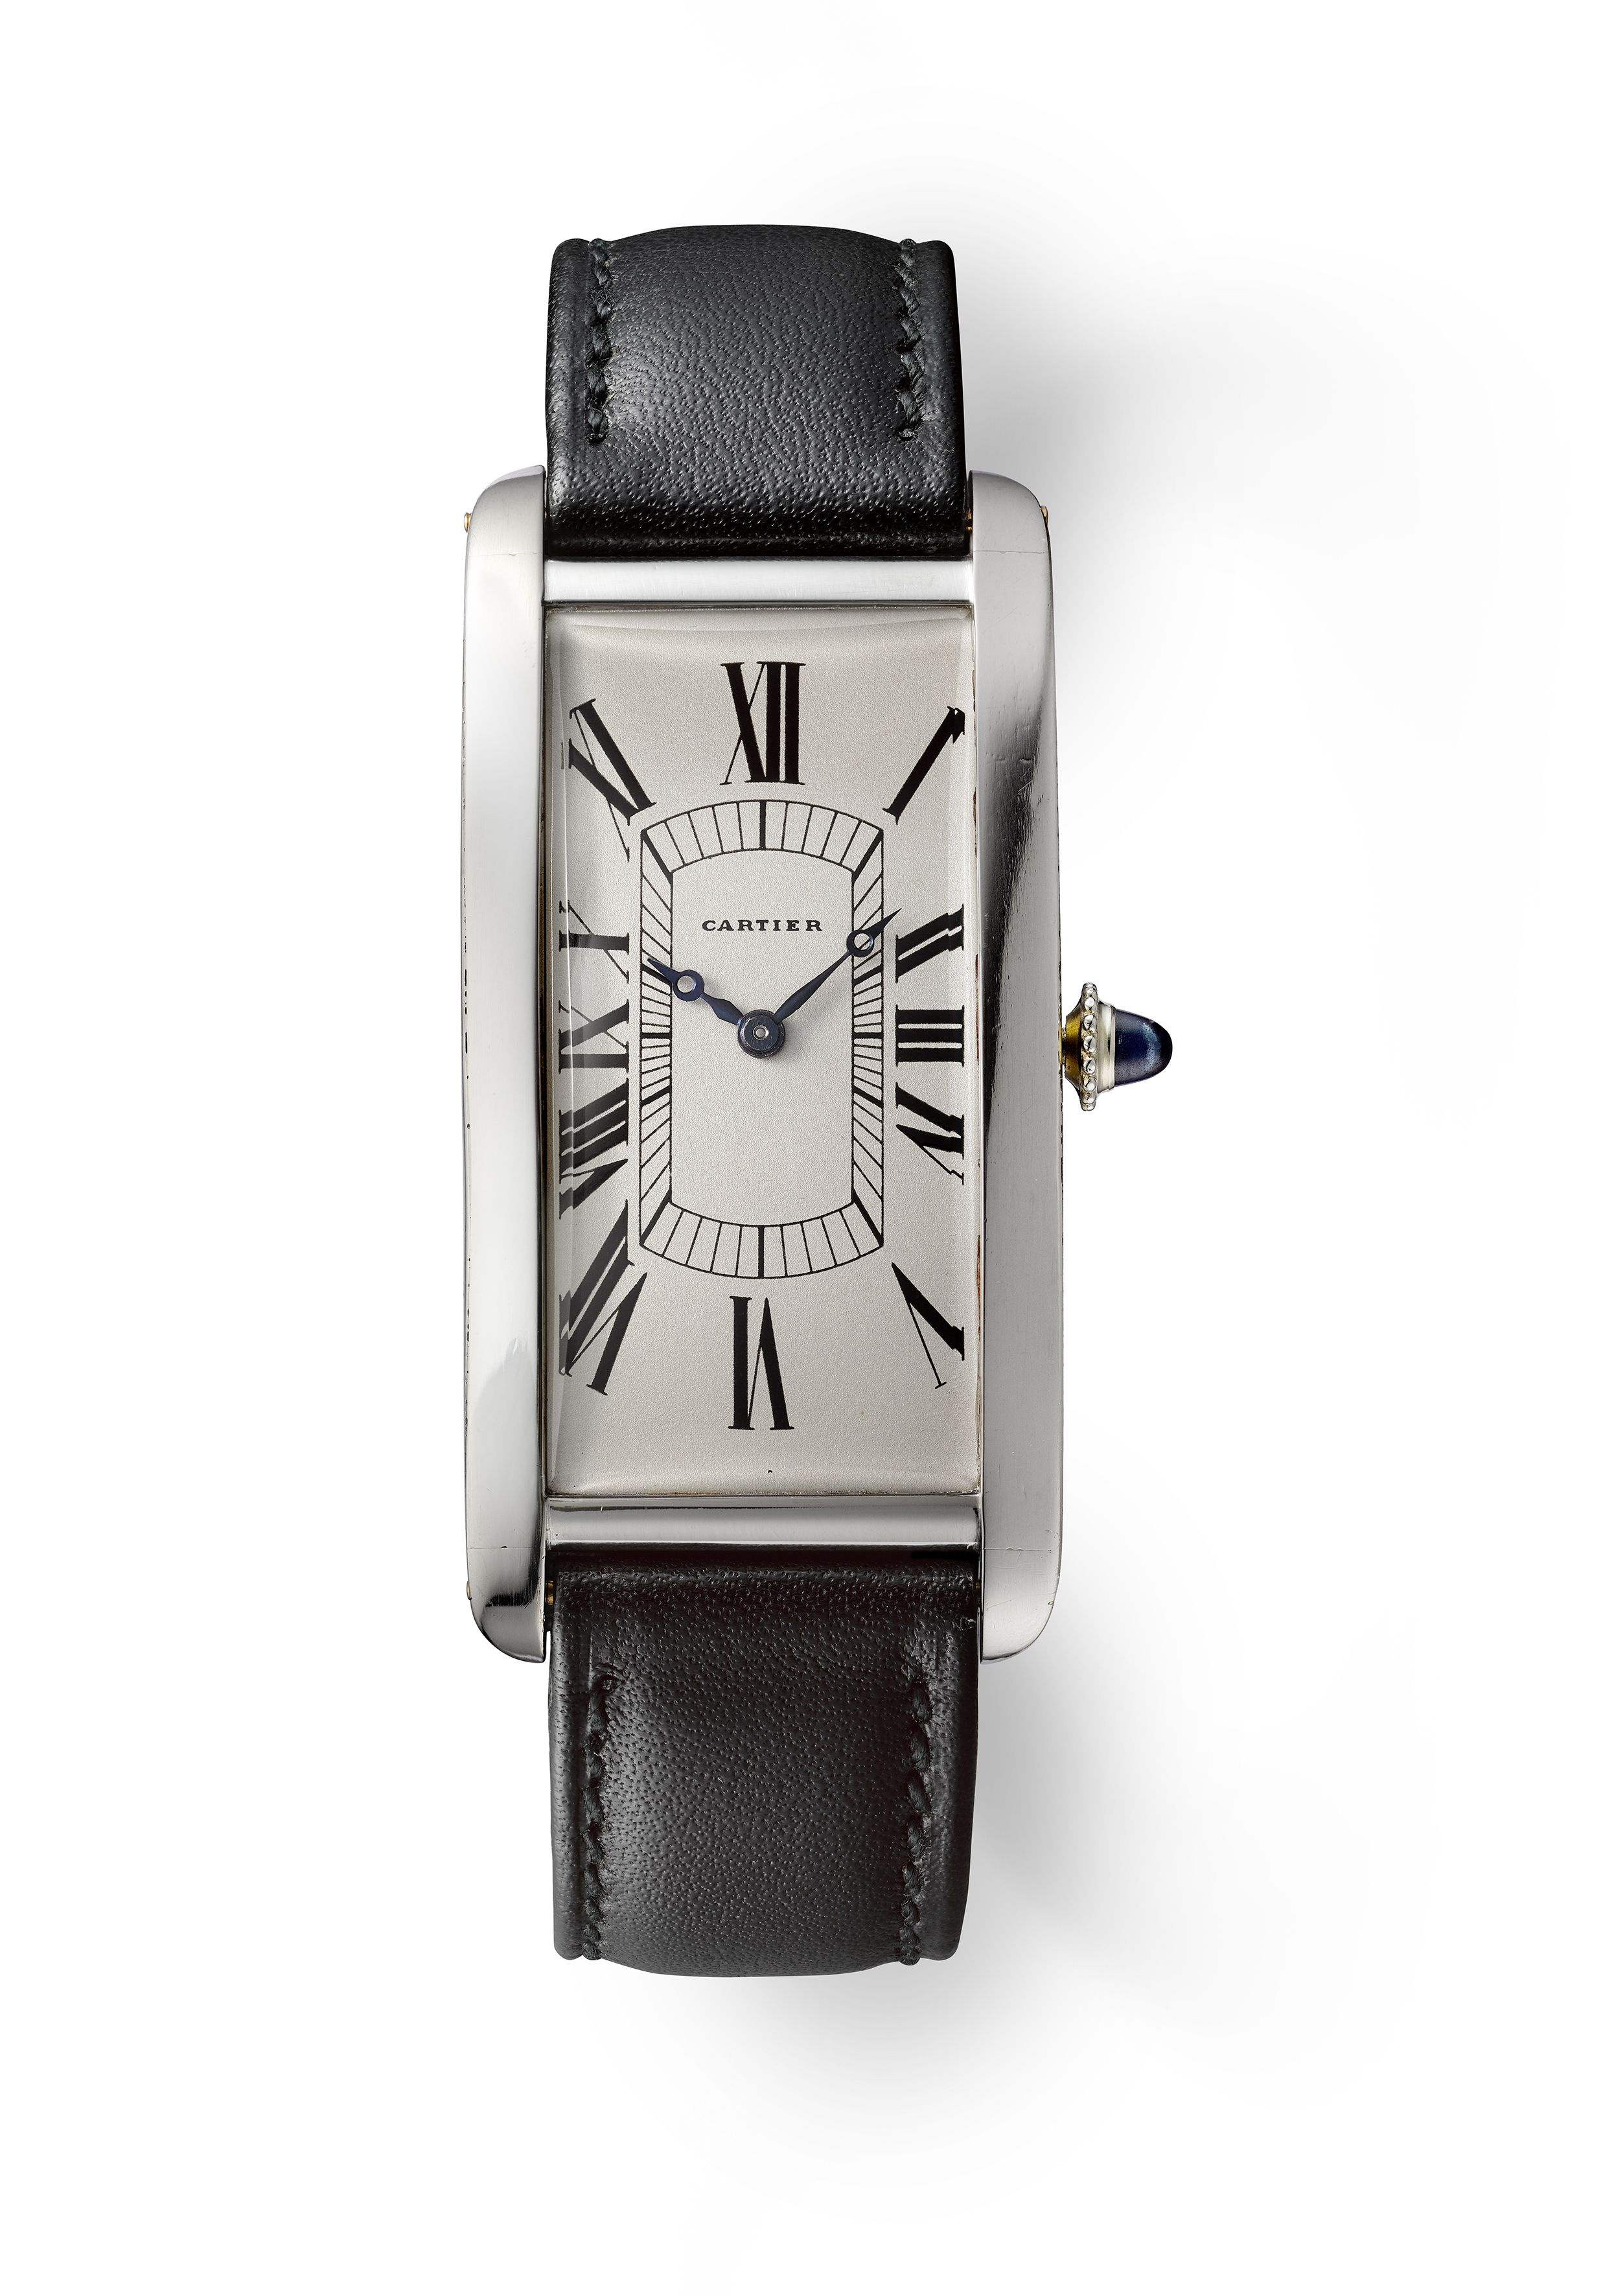 Cartier updates its iconic Tank watches for 2021